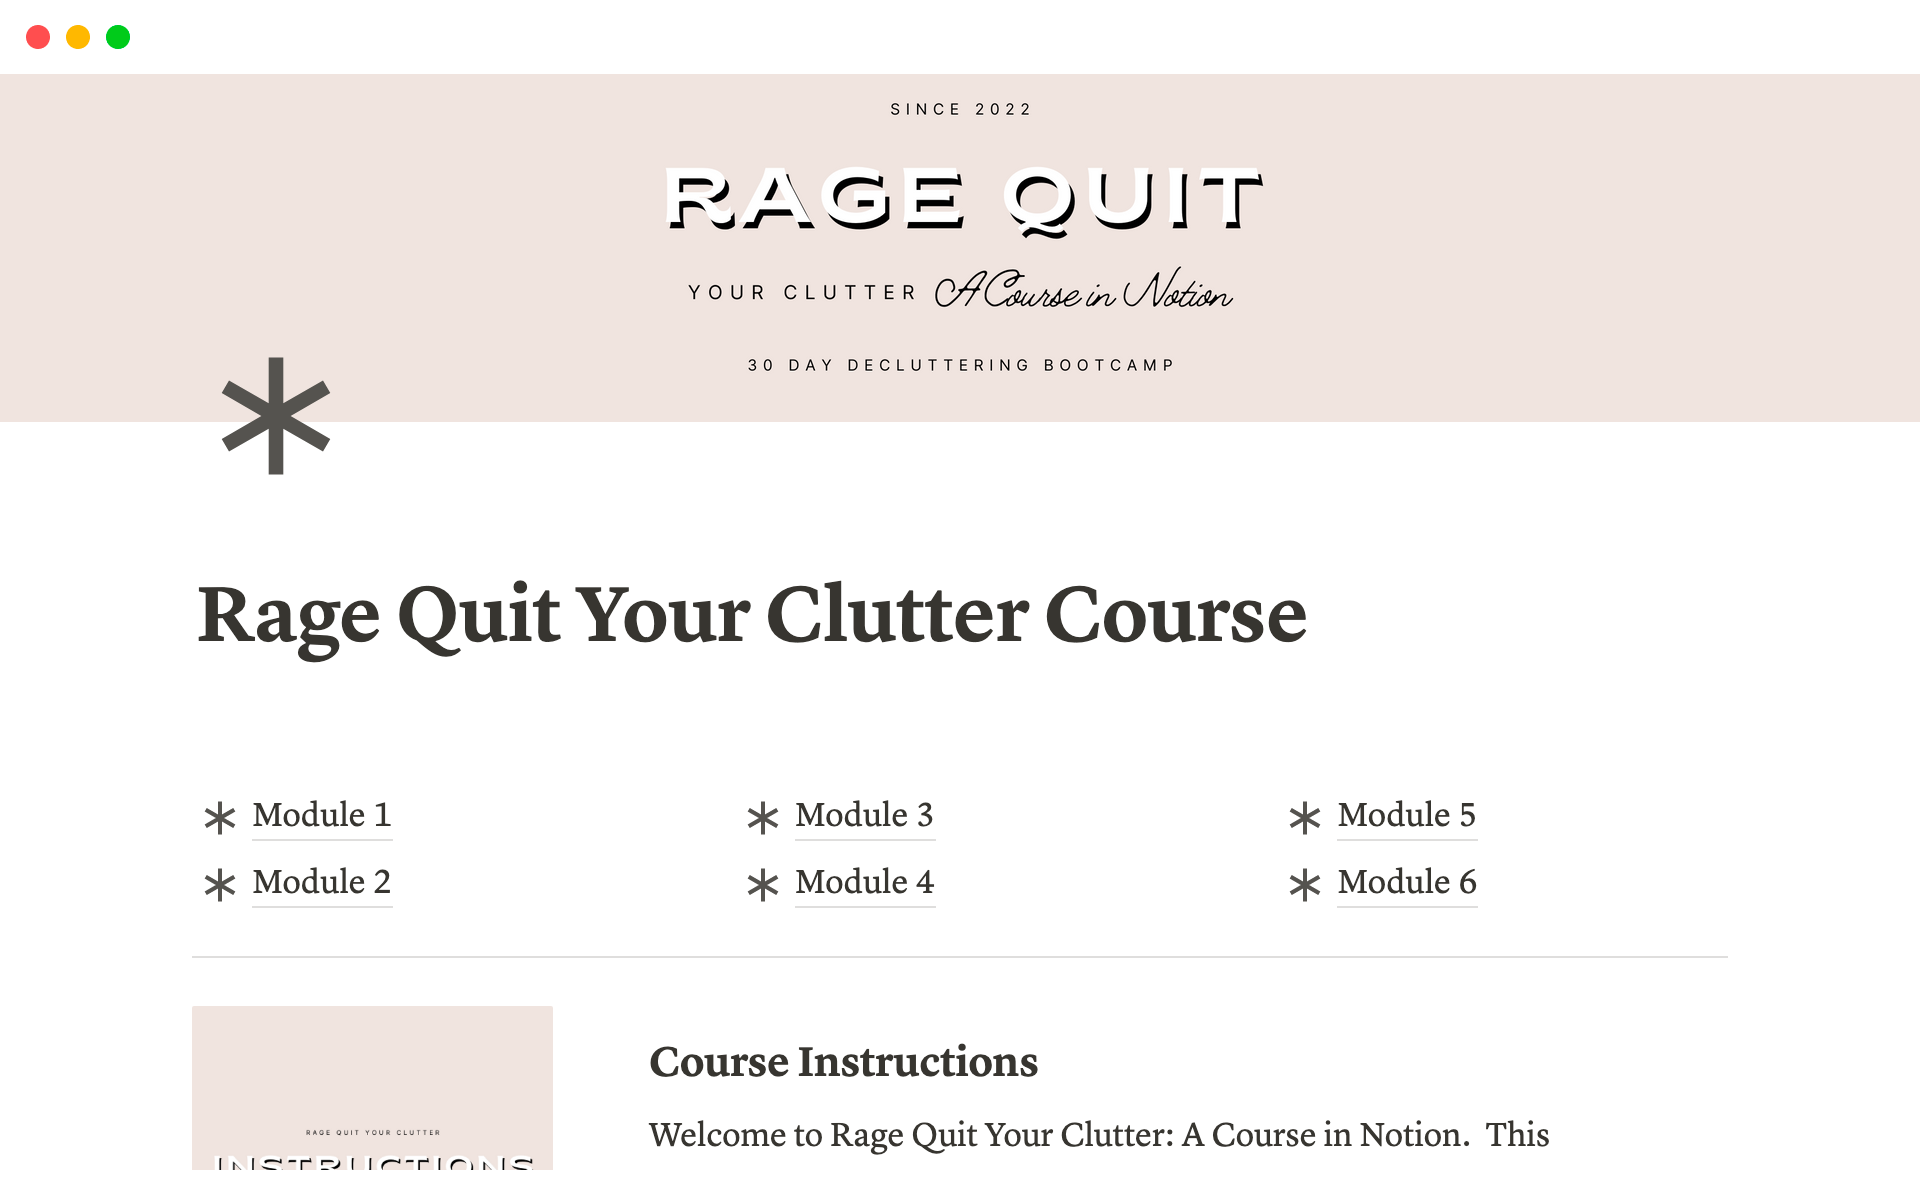 Rage Quit Your Clutter: A 30 Day Decluttering Bootcamp님의 템플릿 미리보기